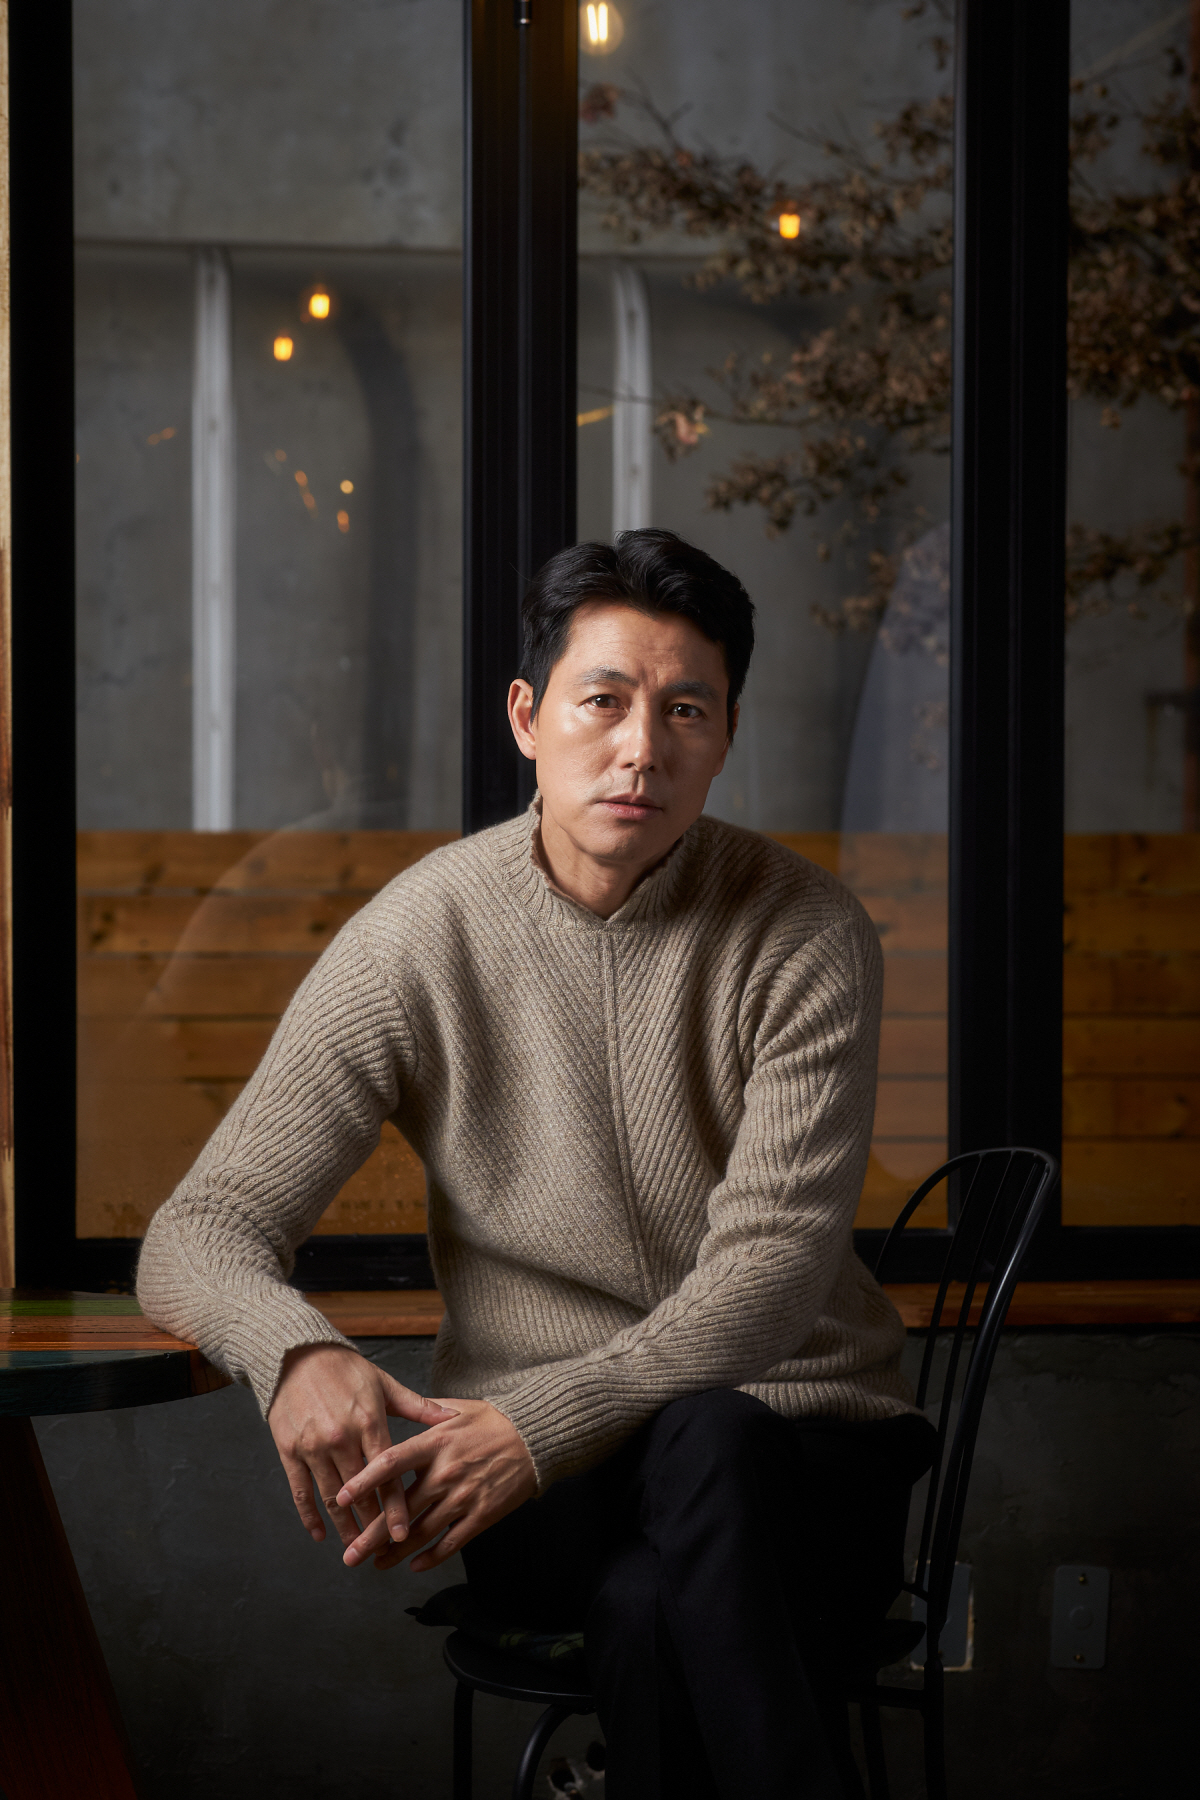 My first production debut, Im having a crazy day, said Actor Jung Woo-sung, 47.Jung Woo-sung, who played Tae-young, who fell into a swamp of Hantang, suffering from private debt because of his lover Michelle Chen (Jeon Do-yeon), who disappeared from the crime thriller The Beasts Who Want to Hold a Jeep (directed by Kim Yong-hoon, produced by BA Entertainment and Megabox Central PlusM).He met with Samcheong-dong, Jongno-gu, Seoul on the morning of the 6th and told the behind-the-scenes episode and recent news about the animals that want to catch straw.The animals that want to catch the straw, which is a film of the same name by Sonne Kaske, depicts the worst choices and consequences of extremely ordinary humans, such as shaky heads, government officials, and housewives whose families have collapsed, to escape desperate situations.All the characters in the movie are forced to catch the straw in the corner because of the inevitable situation, and the human nature is not evil, and it captures 108 minutes of those who see it as a new and unique composition, a restless development, and a stylish mise-en-scene.The animals that want to catch even the straw, which became a screen-expected film in February, were also proven to be directing by winning the Special Jury Award at the 49th Rotterdam International Film Festival, which closed on February 2.In addition, the animals that want to catch even the straw is the overwhelming hottest point of the famous actors who are called Chungmuro The All-Star.In particular, Jung Woo-sung, who won the first best actor award in 25 years at the 40th Blue Dragon Film Awards held last November, attracts attention by making another transformation through animals who want to catch straw.Jung Woo-sung, who played Taeyoung, an immigration officer who plans to make the last tang due to Michelle Chen, who left a huge debt in his future.Jung Woo-sung, who tried to transform the reversal into a character with a soft charisma that has been shown in the meantime and a human charm, witfully captures the ironic situation that takes place in the process of developing a tense story and predicted the birth of a new life character in the 26th year of debut this year.Jung Woo-sung is in the midst of preparing for the commercial movie production Guardian which is scheduled to crank up on the 10th.Guardian is an emotional action film about a mans struggle to protect the last remaining person. Jung Woo-sung directs and appears directly. In addition, Kim Nam-gil, Park Sung-woong, Elijah and Kim Joonhan are added.Jung Woo-sung said: Im really distracted right now, Im hunting in the provinces, the scene atmosphere is still going to be good.I had no intention of starring in the production from the beginning. I had to star. Guardian has not been in production for years.It was a work planned by Watchers PD, but the doctor was accidentally hit and became Top Model The biggest influence on director Jung Woo-sung is director Kim Sung-soo of Bit and Asura, which seems to have helped me acquire the opportunity or way to participate in the work.Ive talked about it before, but Ive suggested that I write a narration of Bit, and Ive praised and reflected my Top Model, which has helped me expand my confidence.I have such confidence, so I took a short image and I was prepared to supervise.  I am good at communicating with actors and staff in the current production, but I do not think I will suffer in the field. The beasts who want to catch even the straw is a crime scene of ordinary humans planning the worst of the worst to take the last chance of life, the money bag.Jeon Do-yeon, Jung Woo-sung, Bae Sung-woo, Jung Man-sik, Jin Kyung, Shin Hyun Bin, Jungaram, Park Ji-hwan, Kim Joonhan, Heo Dong Won, and Yoon Yeo Jung.It was scheduled to open on December 12, but it was postponed due to the spread of new coronavirus infection.